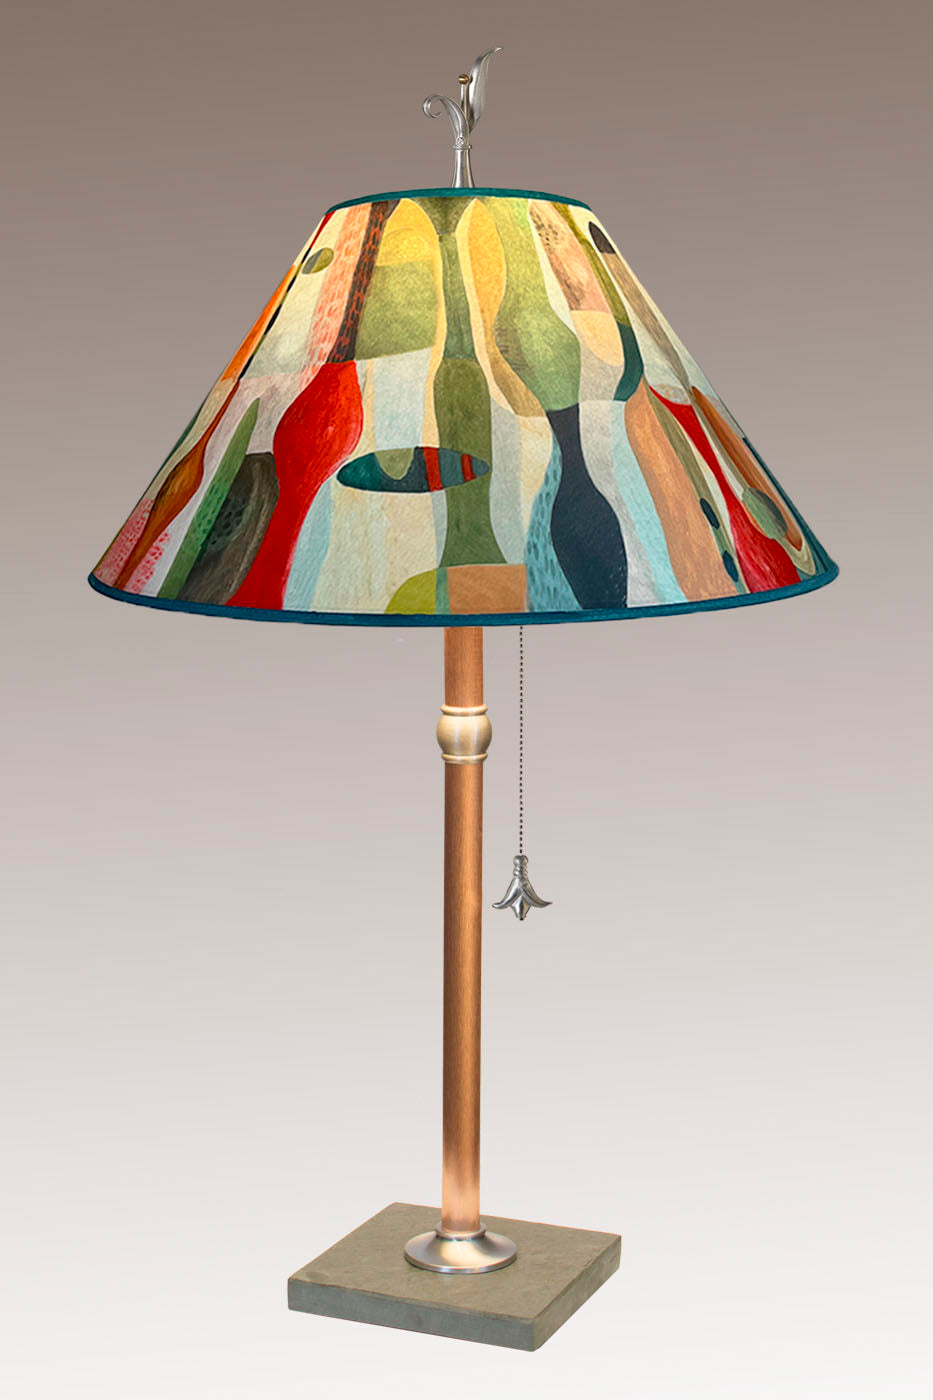 Copper Table Lamp with Large Conical Shade in Riviera in Poppy